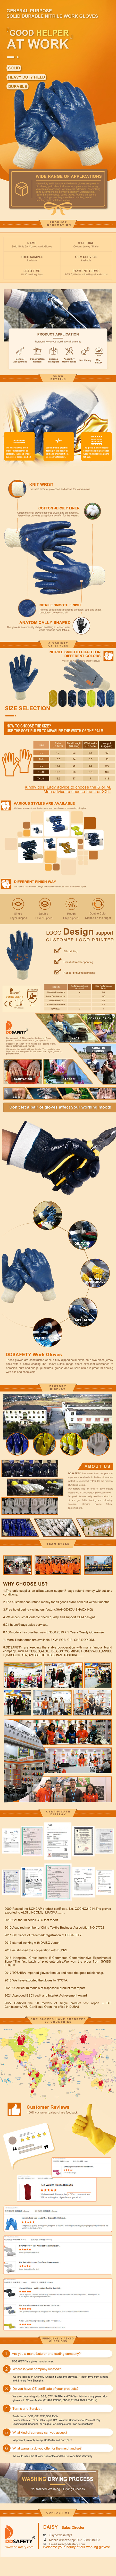 Cotton Gloves With Full Nitrile Coating, Two-Piece Interlocking Shell Luvas - DCN406 Cotton Gloves With Full Nitrile Coating, Two-Piece Interlocking Shell Luvas - DCN406 gloves,nitrile gloves,nitrile coating gloves,Full Nitrile Coating gloves,full coating gloves